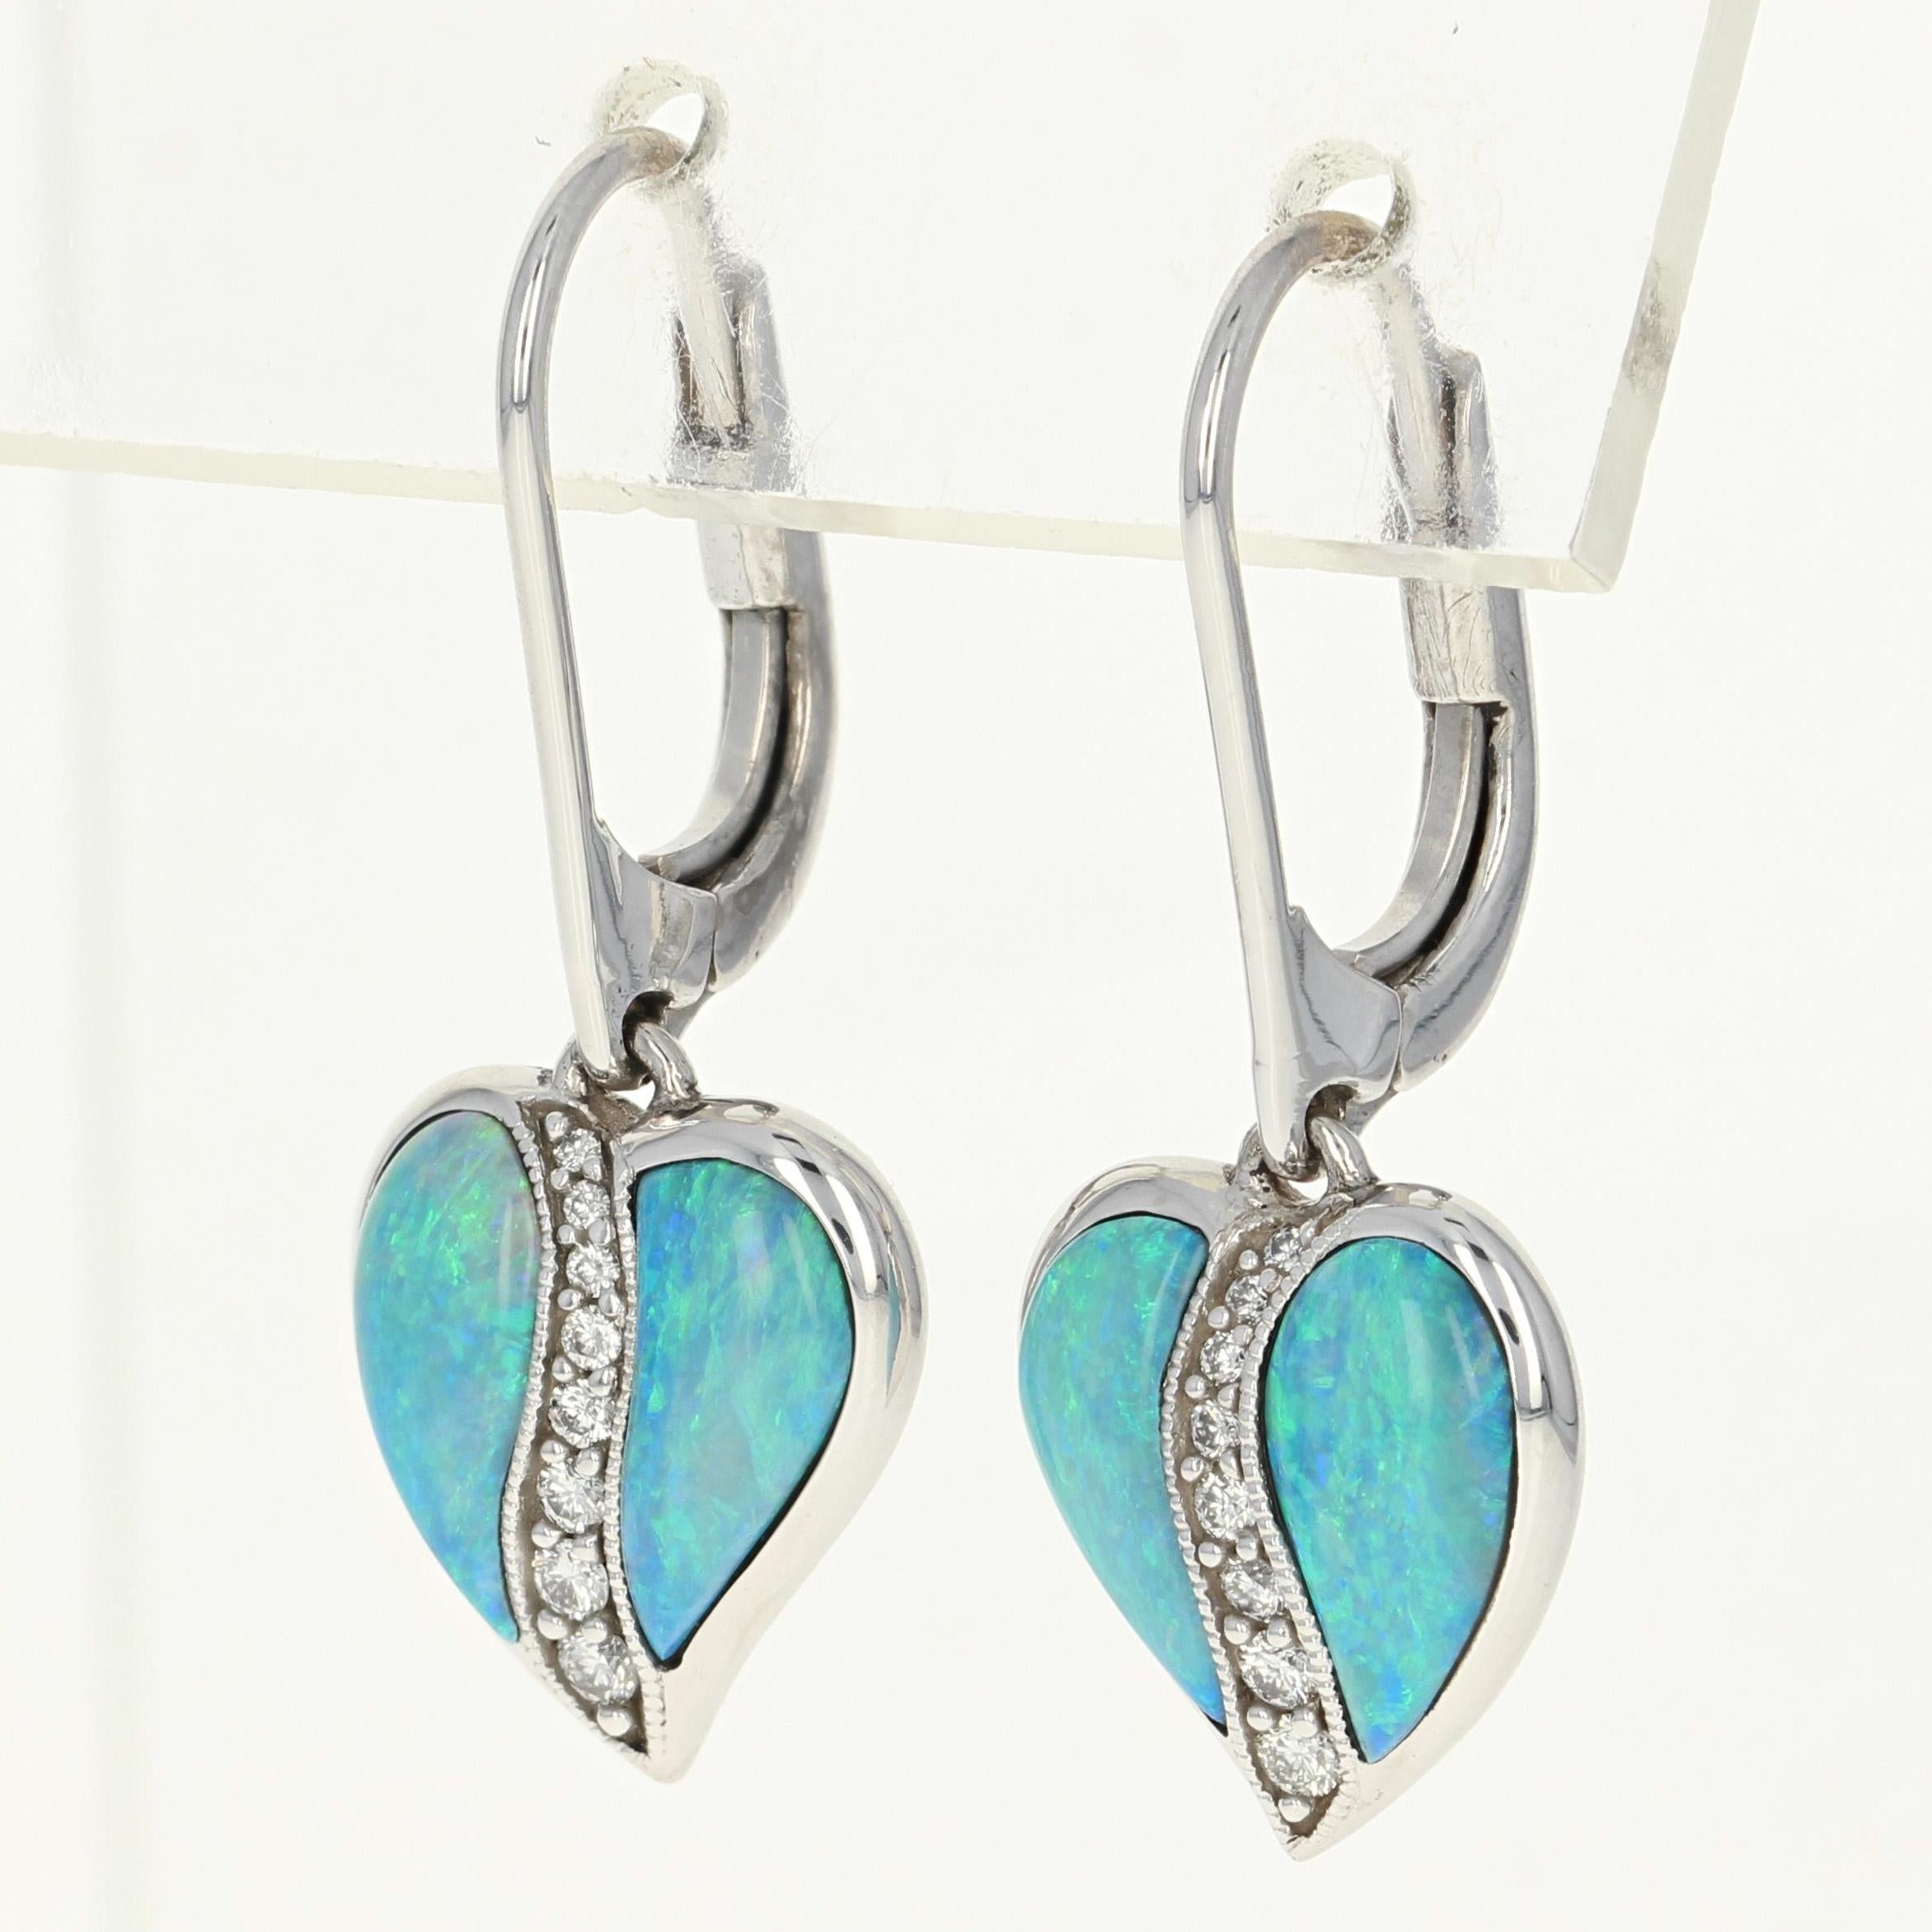 Add a vivacious splash of color and shine to your wardrobe with this fabulous NEW pair of gemstone earrings by Kabana! Composed of glistening 14k white gold, these earrings showcase a graceful leaf design adorned with radiant opals. A graduated row